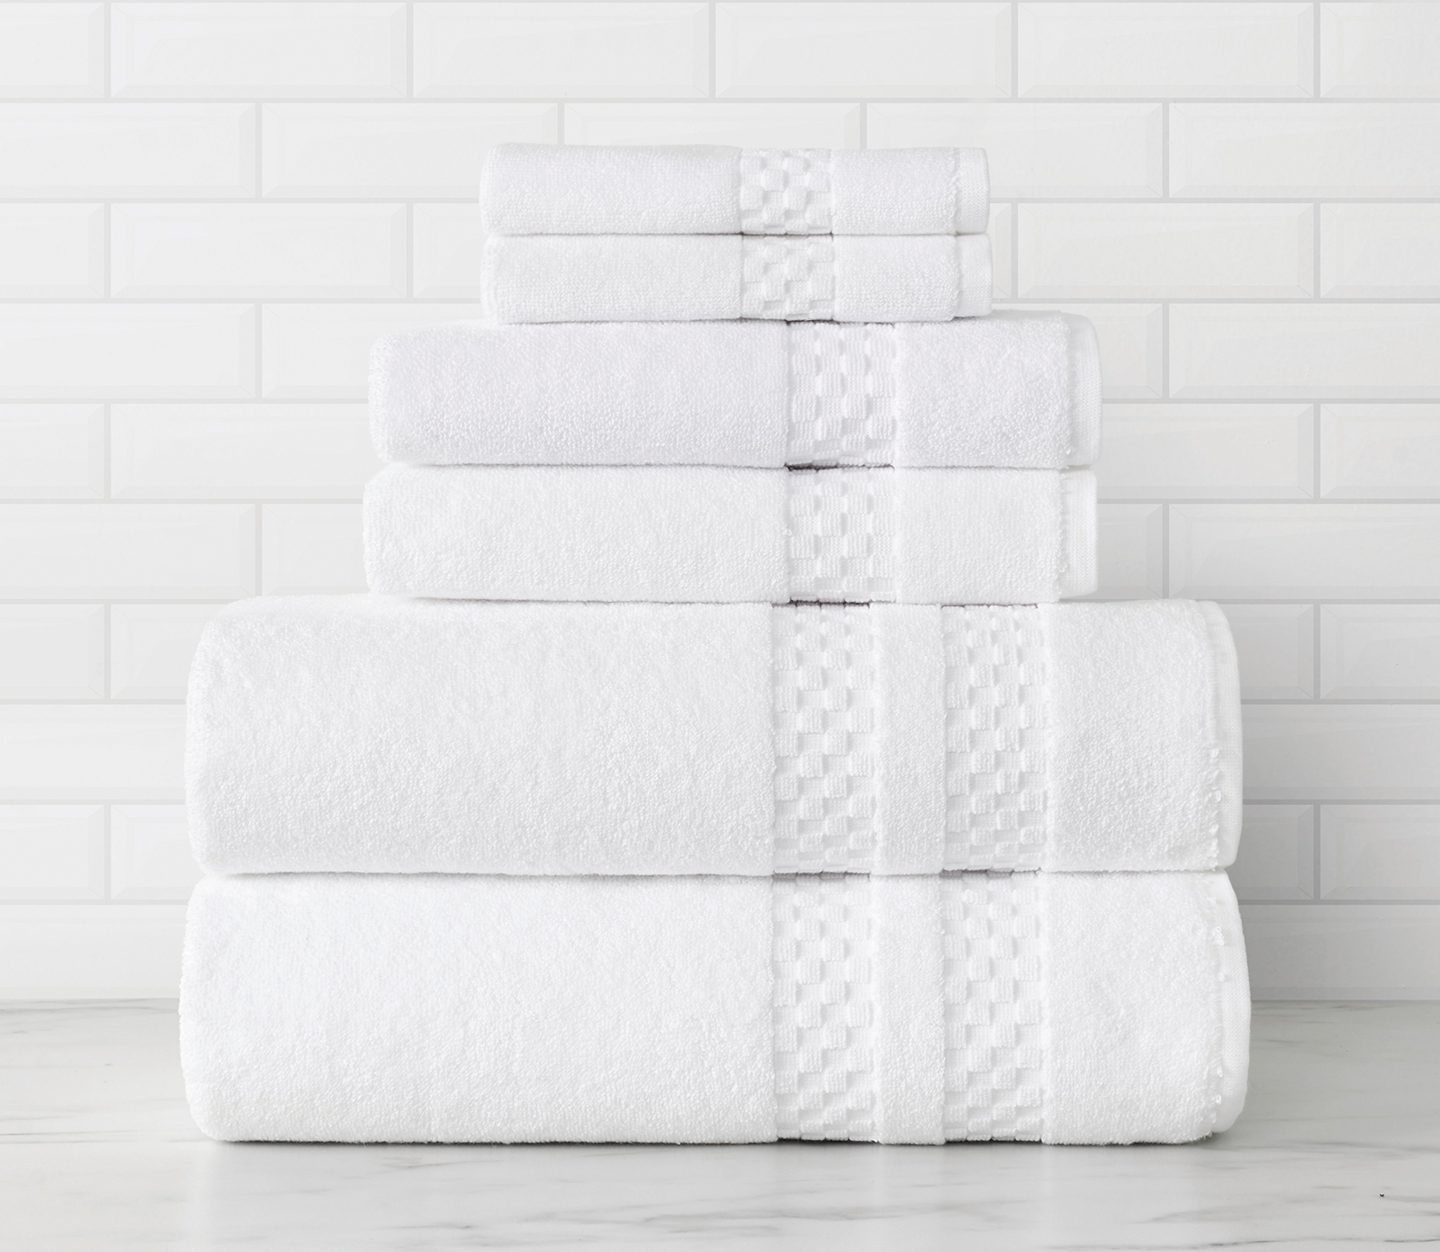 https://www.standardtextile.com/wp-content/uploads/2023/03/Towel-CapitolCollection-02.jpg